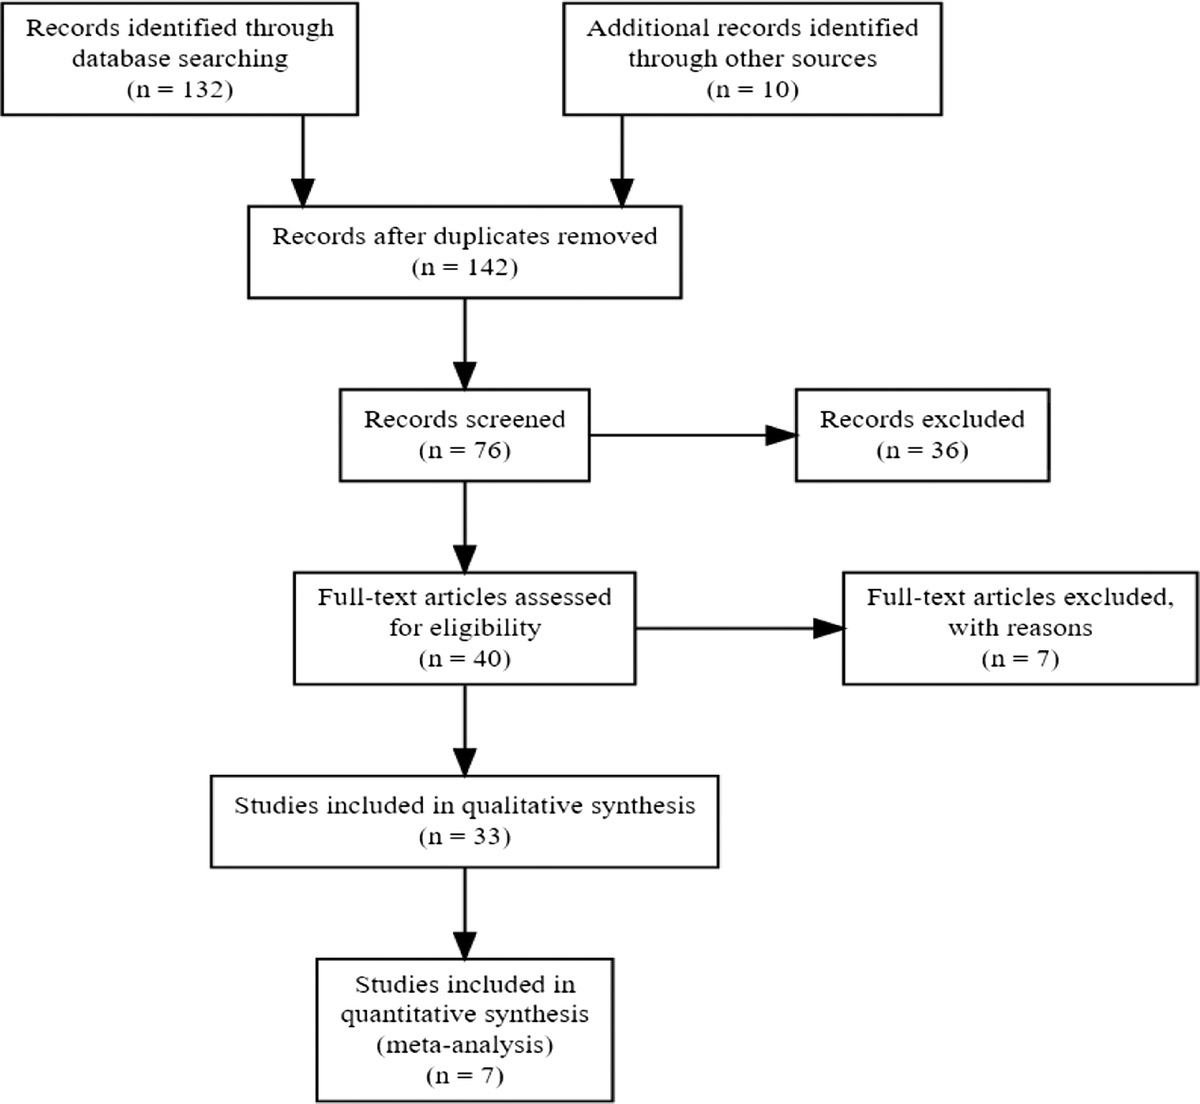 Antidepressant-Associated Treatment Emergent Mania: A Meta-Analysis to Guide Risk Modeling Pharmacogenomic Targets of Potential Clinical Value